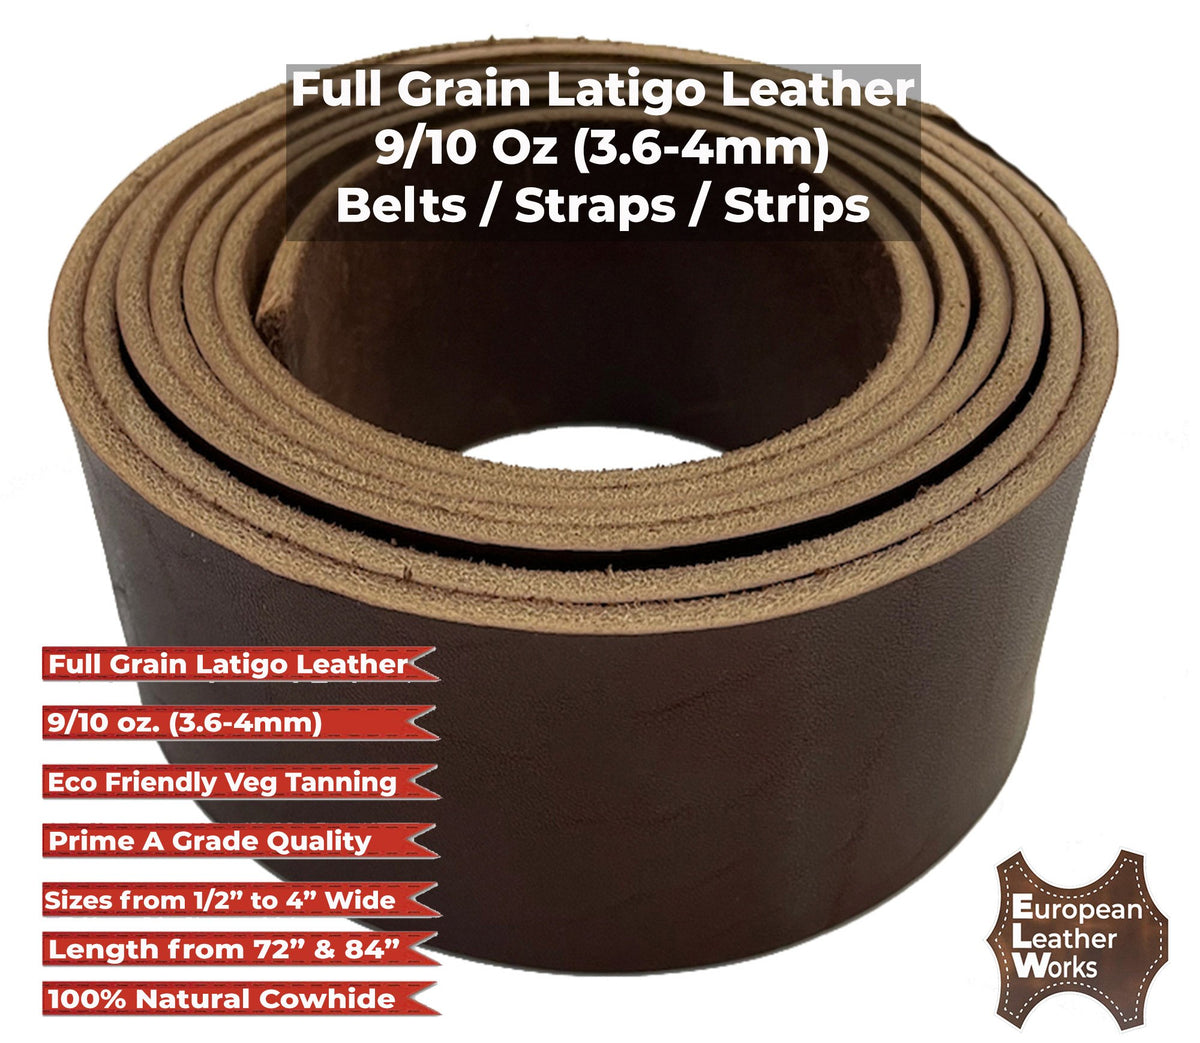 ELW Brown Tooling Leather Straps 1/2 to 4 Wide, 68-72 Inches Long 5/6 oz.